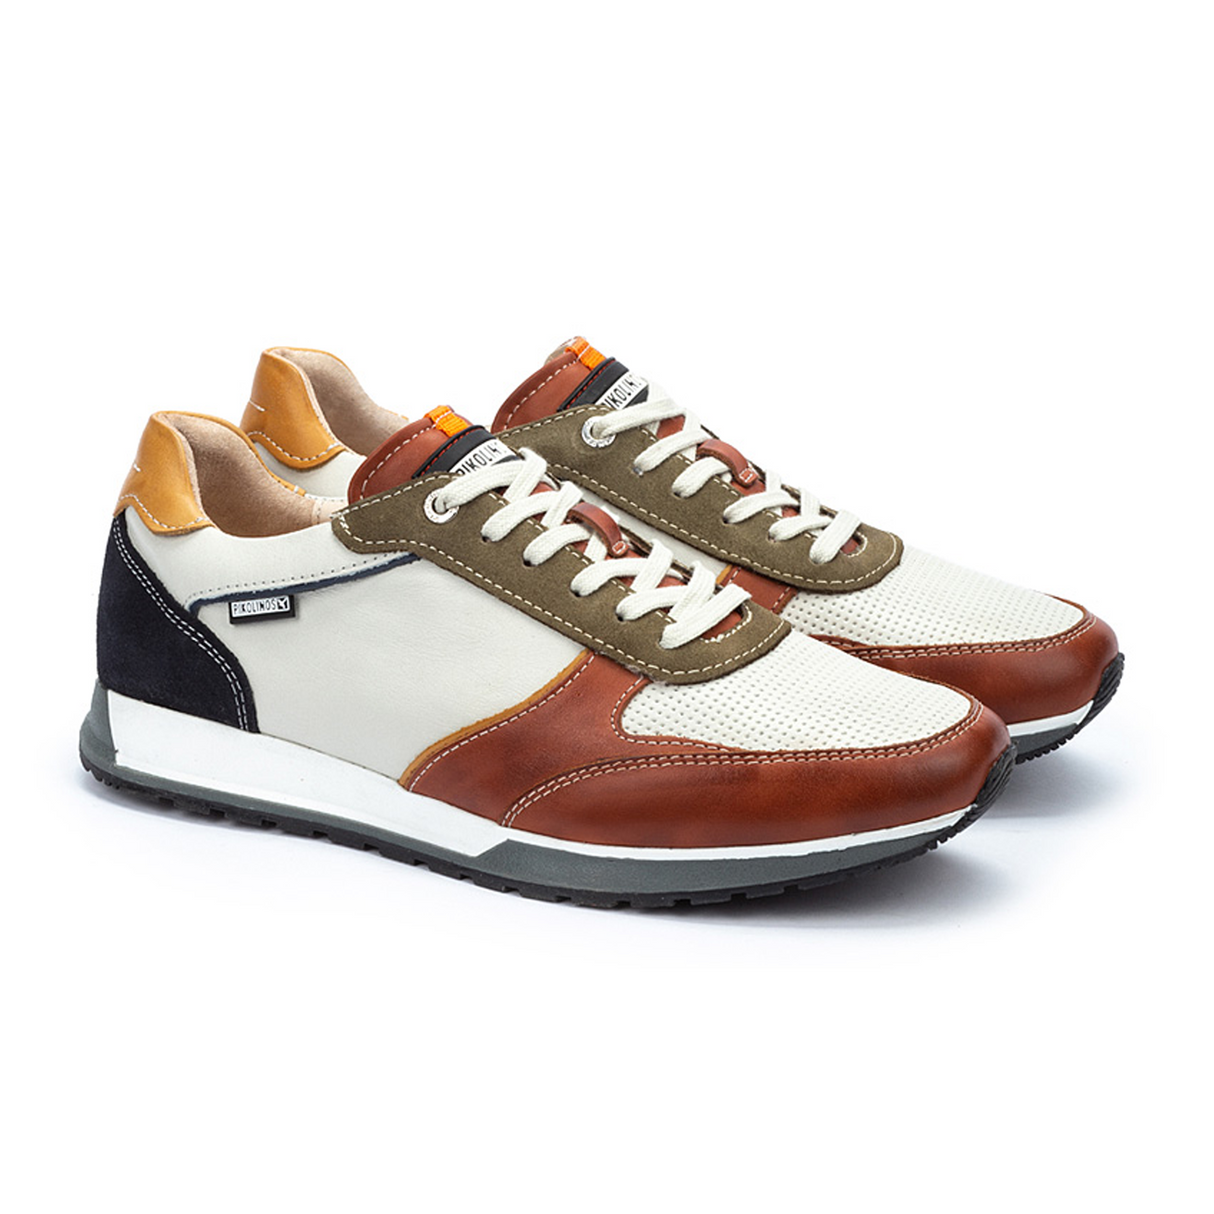 Pikolinos Cambil M5N-6111C2 (Men) - Brick Athletic - Casual - Lace Up - The Heel Shoe Fitters